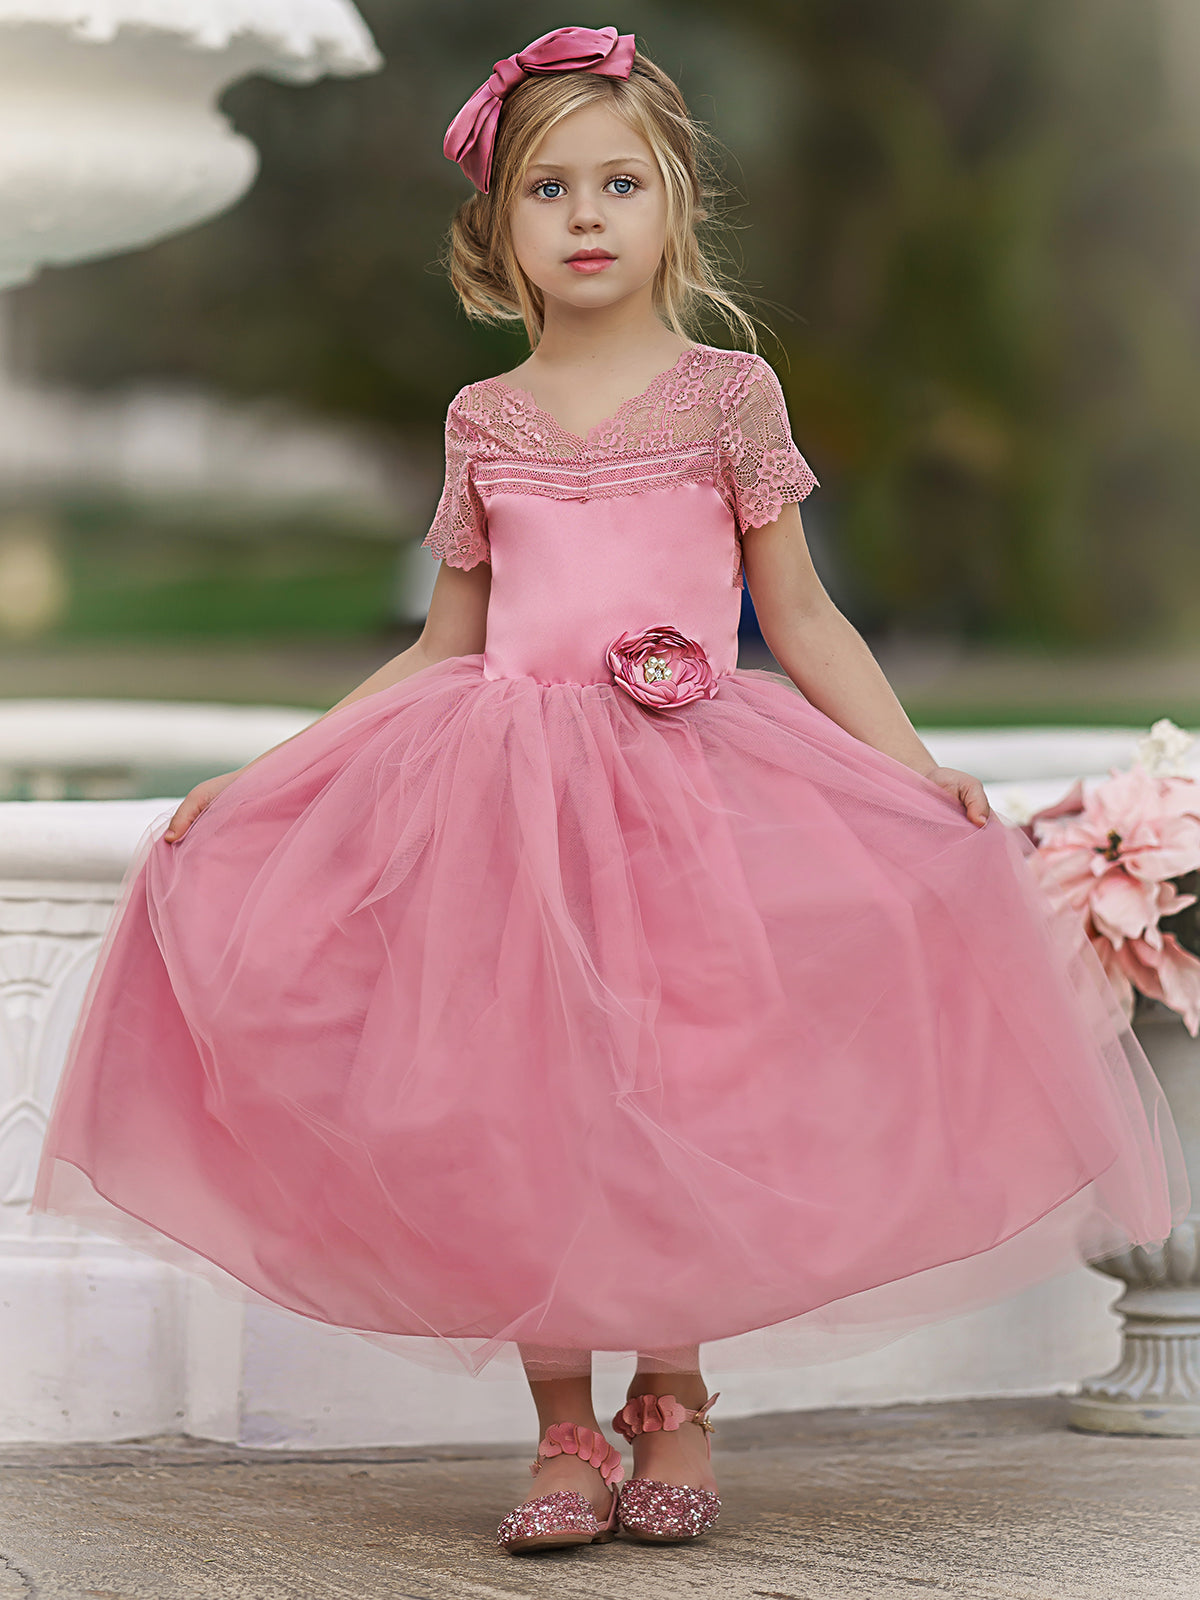 Girls Lace Sleeve Maxi Dress with Flower Clip - Dressy Dress